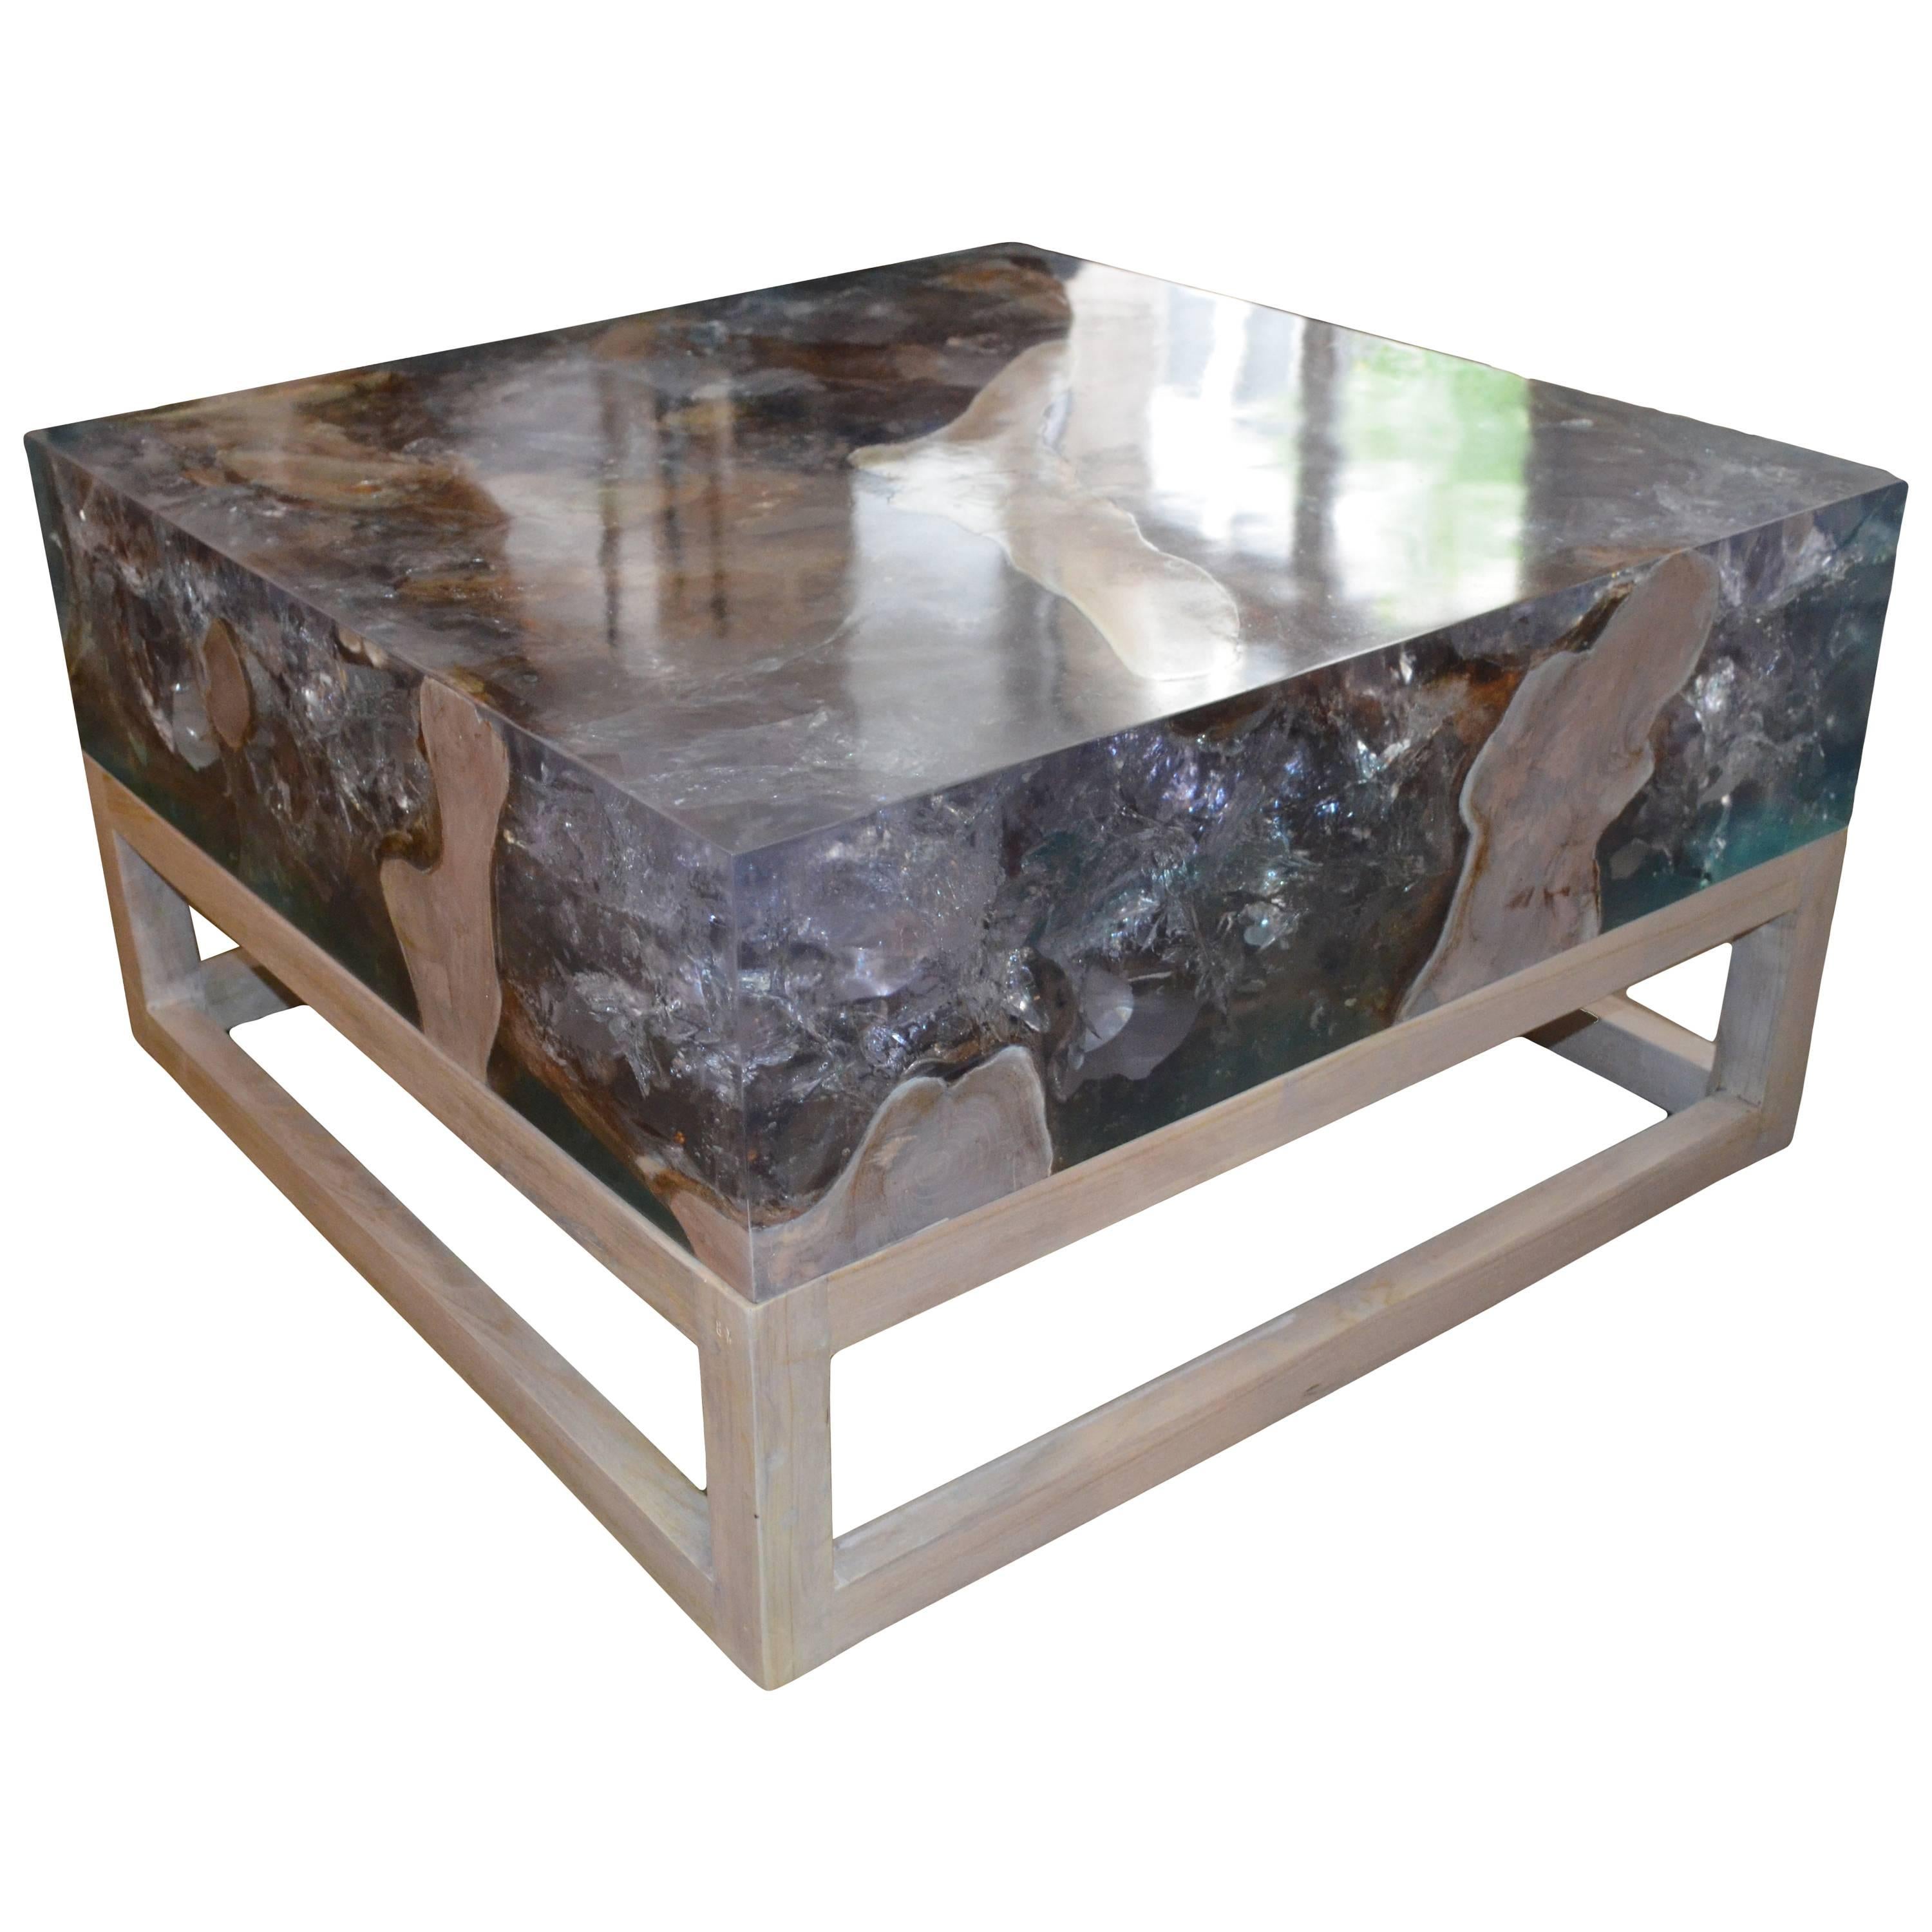 Andrianna Shamaris St. Barts Cracked Resin Coffee Table or Side Table For Sale